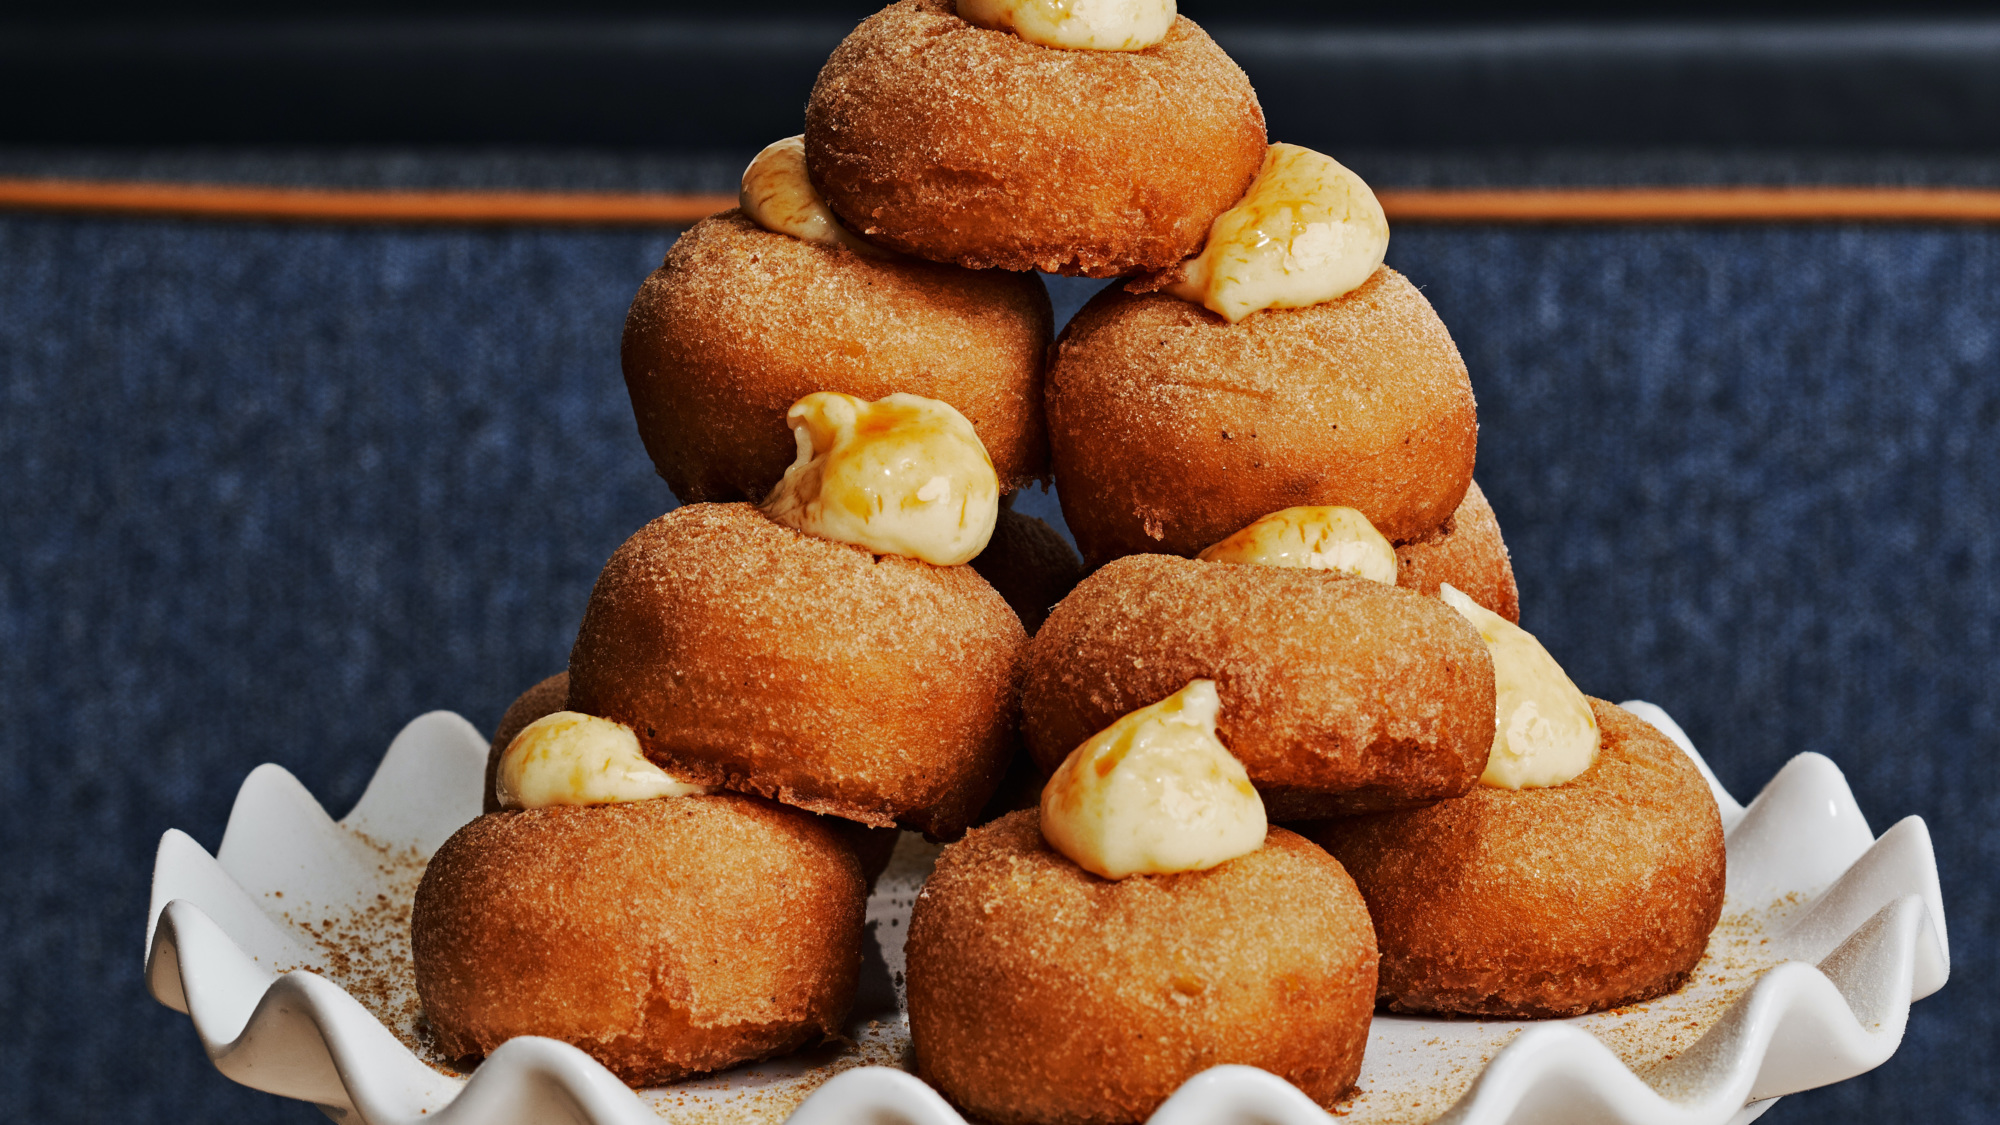 The Wayward-Federal Donuts croquembouche collaboration. // Photo courtesy of the Wayward